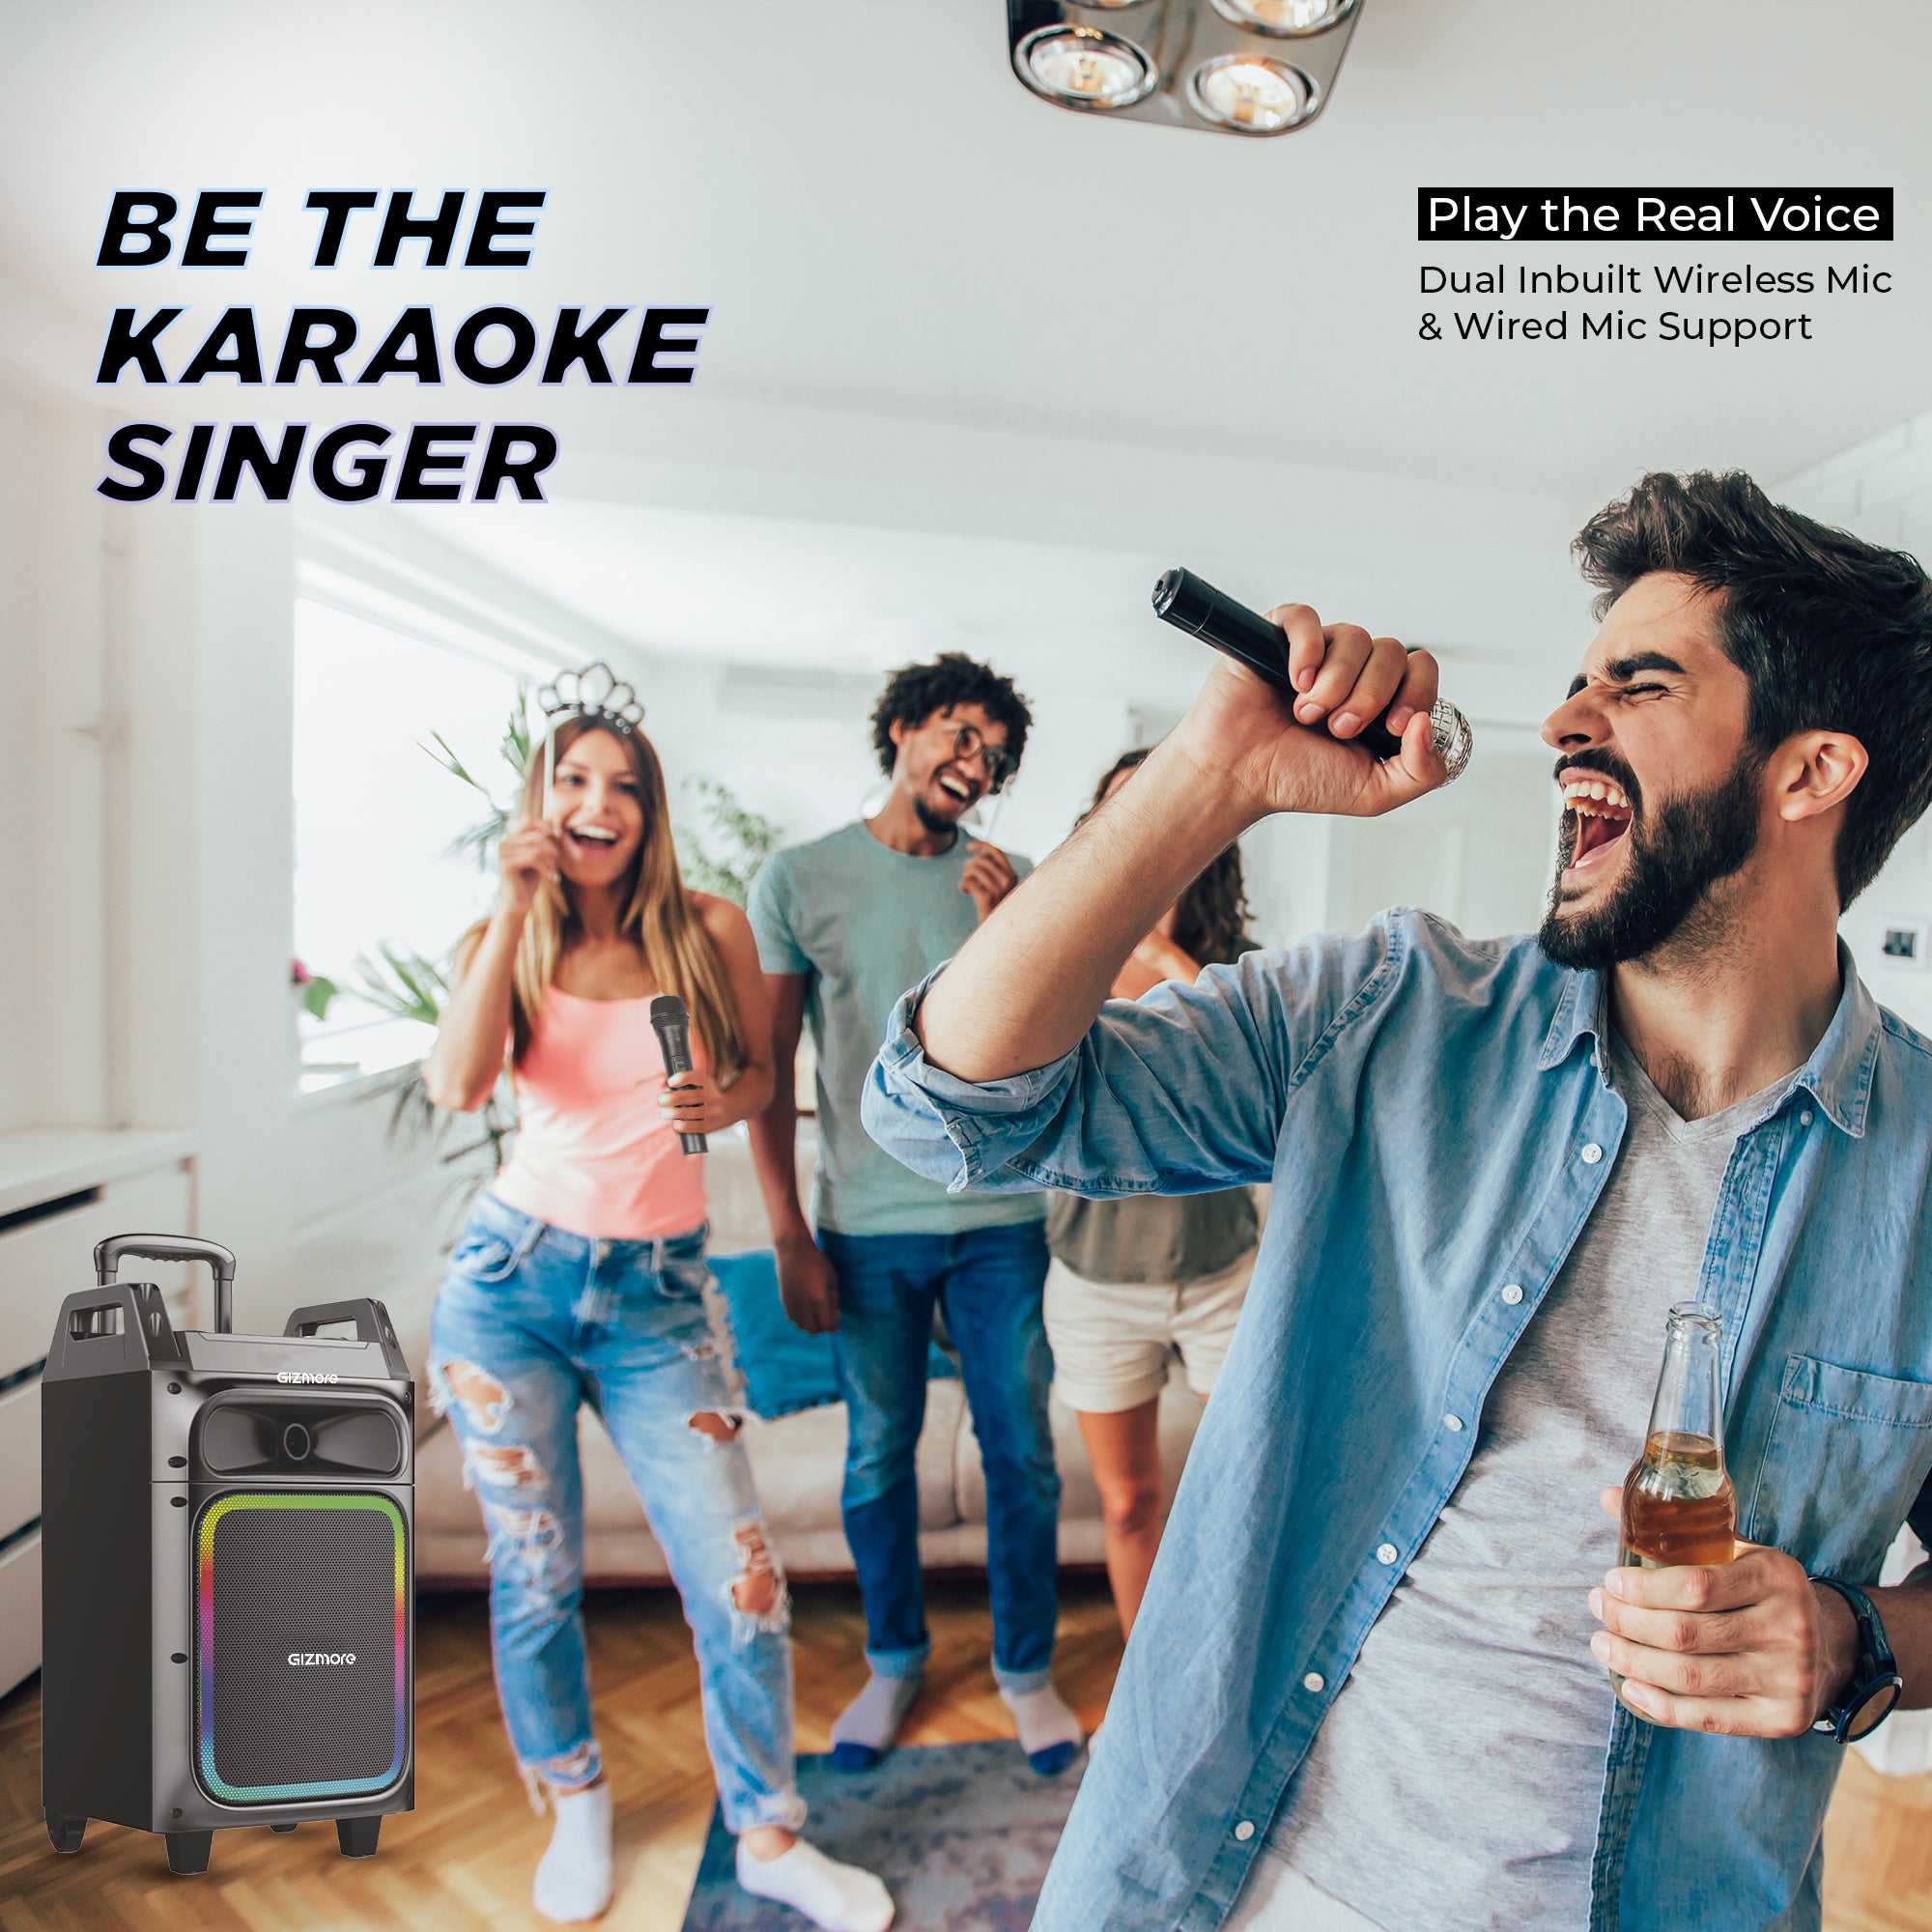 GIZMORE 80W T5000 Pro Trolley Party Speaker with Dual Wireless MIC, 4 Hrs Playtime, Supporting Digital LED Display, RGB Lights, Connect with Bluetooth, USB, FM, AUX & SD Card, Guitar and Remote Control